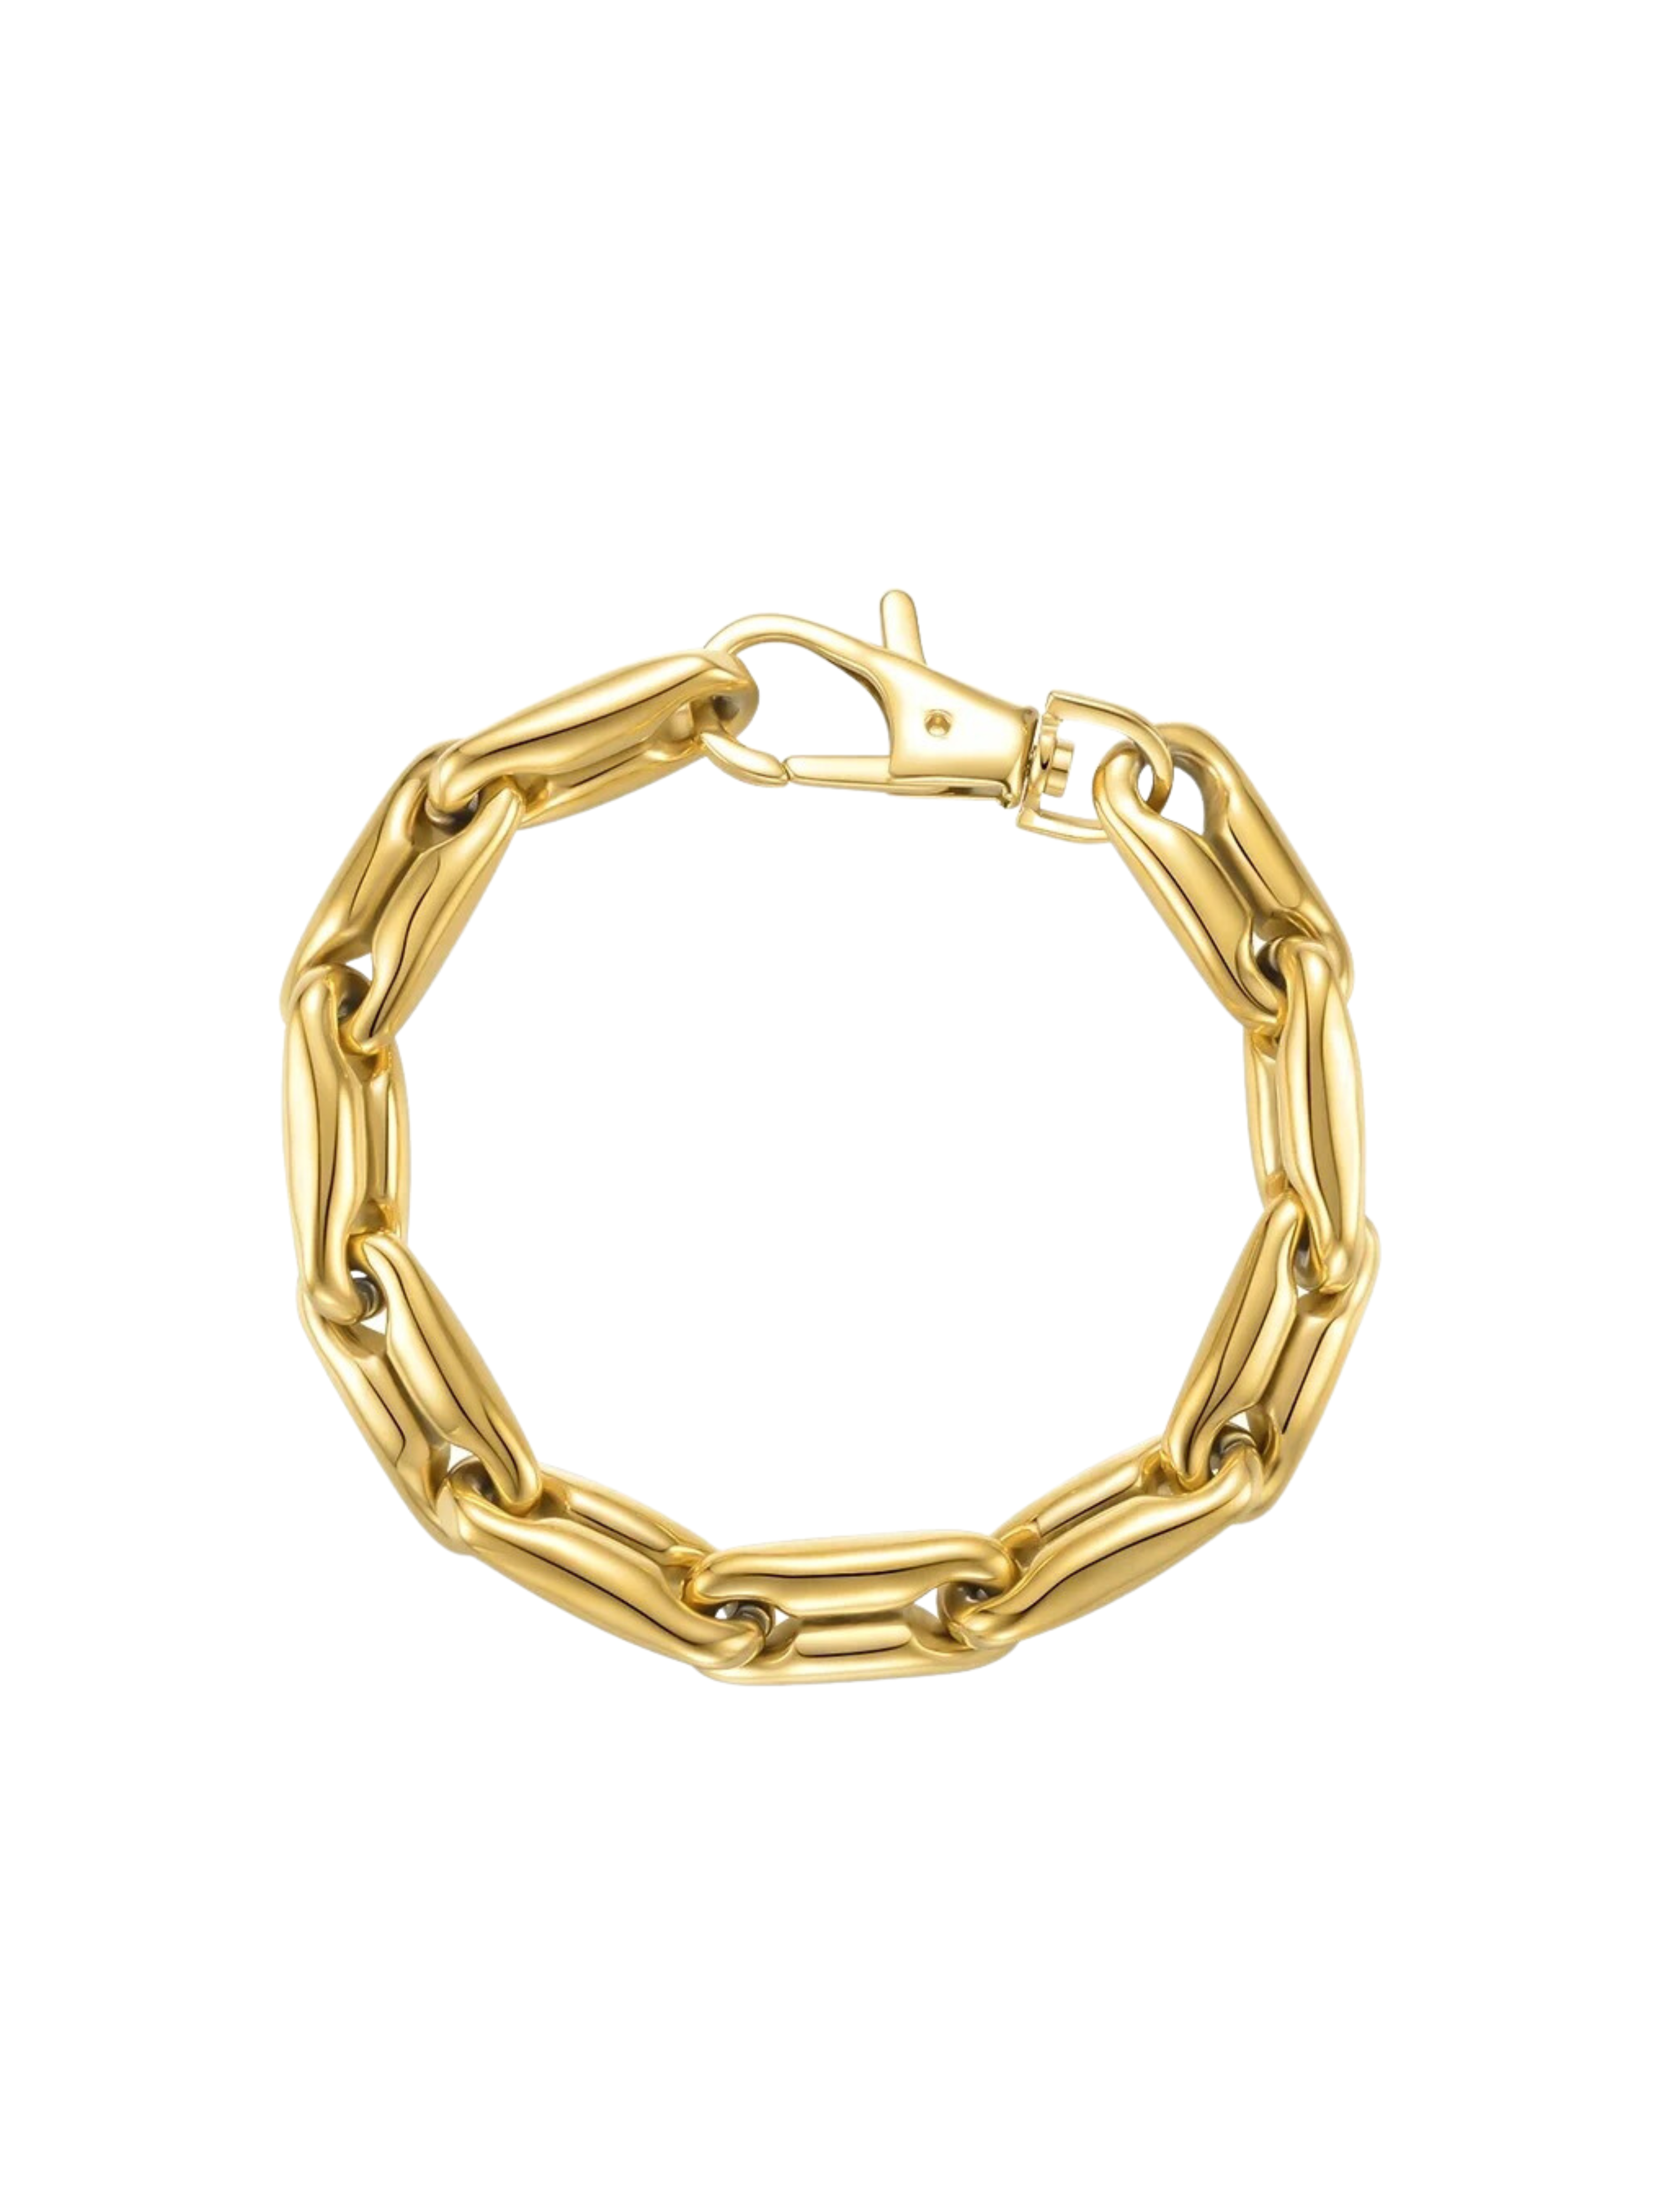 GOLDxTEAL gold chunky link bracelet. Premium stainless steel 18k gold plated chain bracelet.